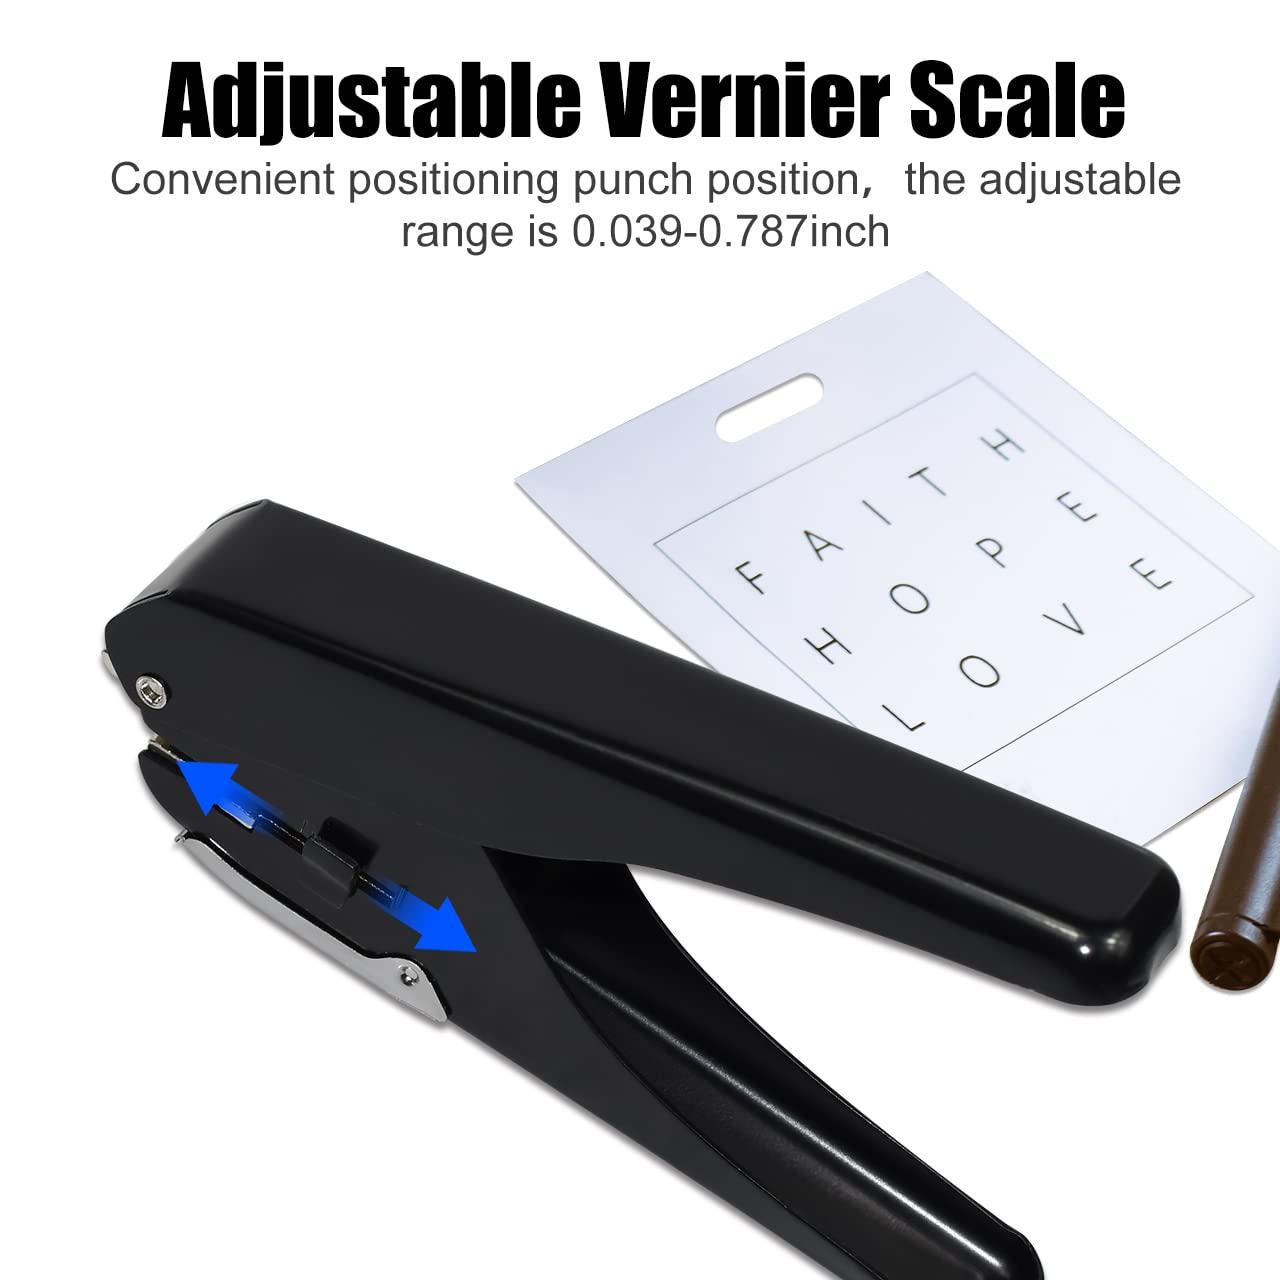 Heavy-Duty Elliptical Punch - Badge Hole Punch for ID Cards, PVC Slots, and  Paper 